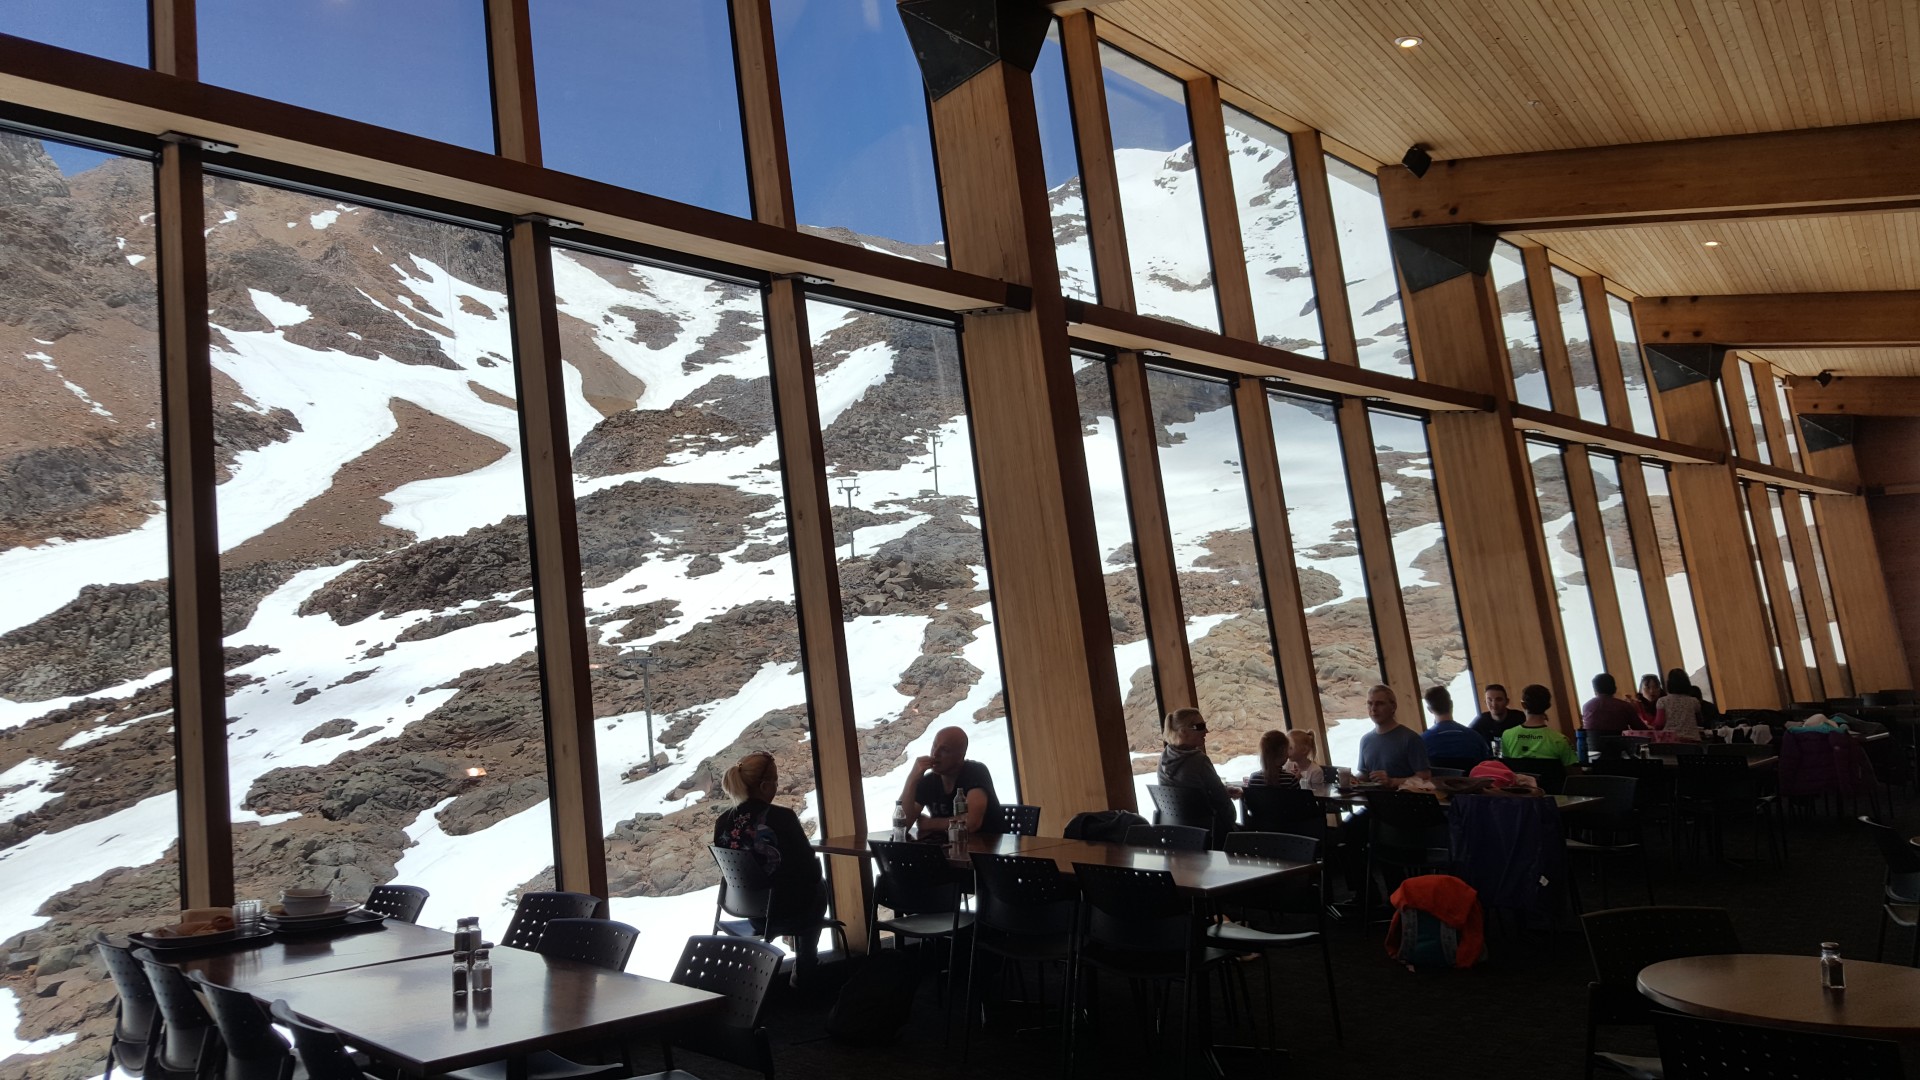 Sitting above 2000m you can wine & dine play in the snow